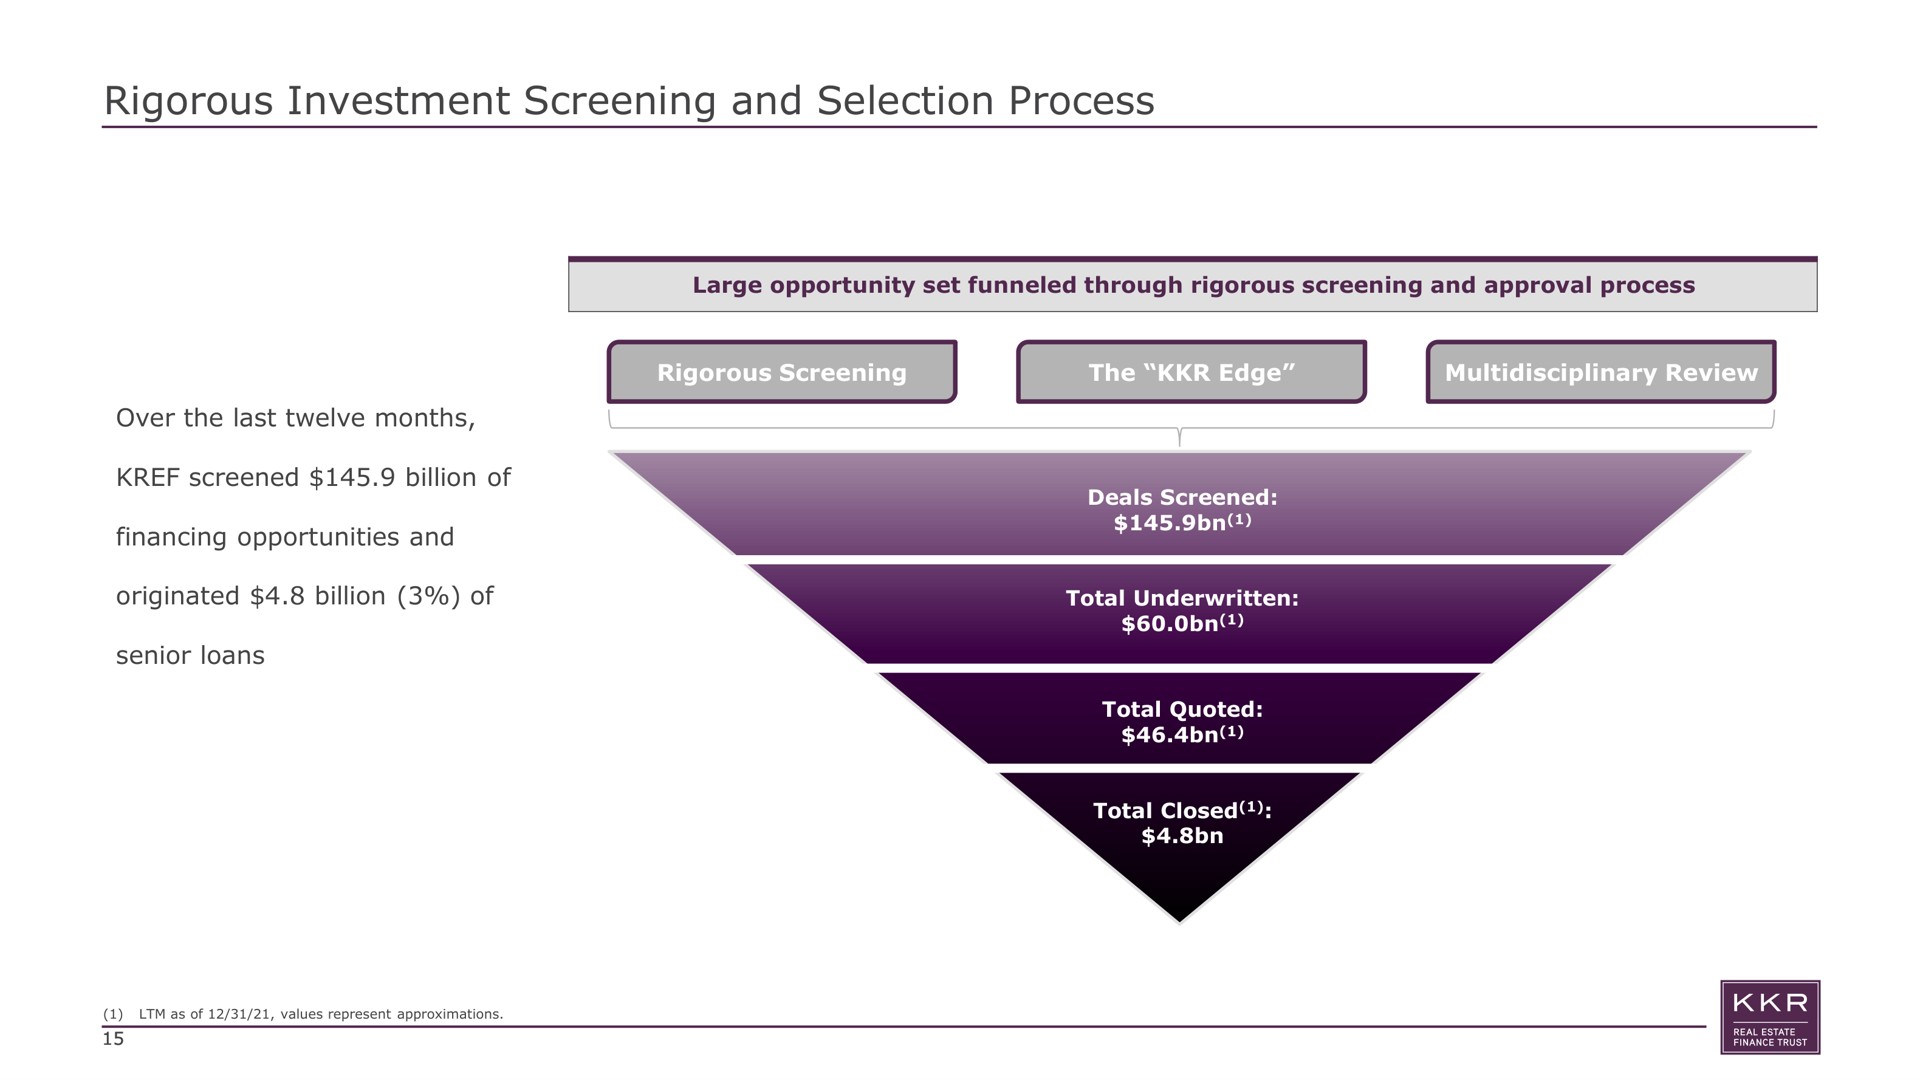 rigorous investment screening and selection process rigorous screening the edge review over the last twelve months screened billion of financing opportunities and originated billion of senior loans large opportunity set funneled through approval total underwritten | KKR Real Estate Finance Trust